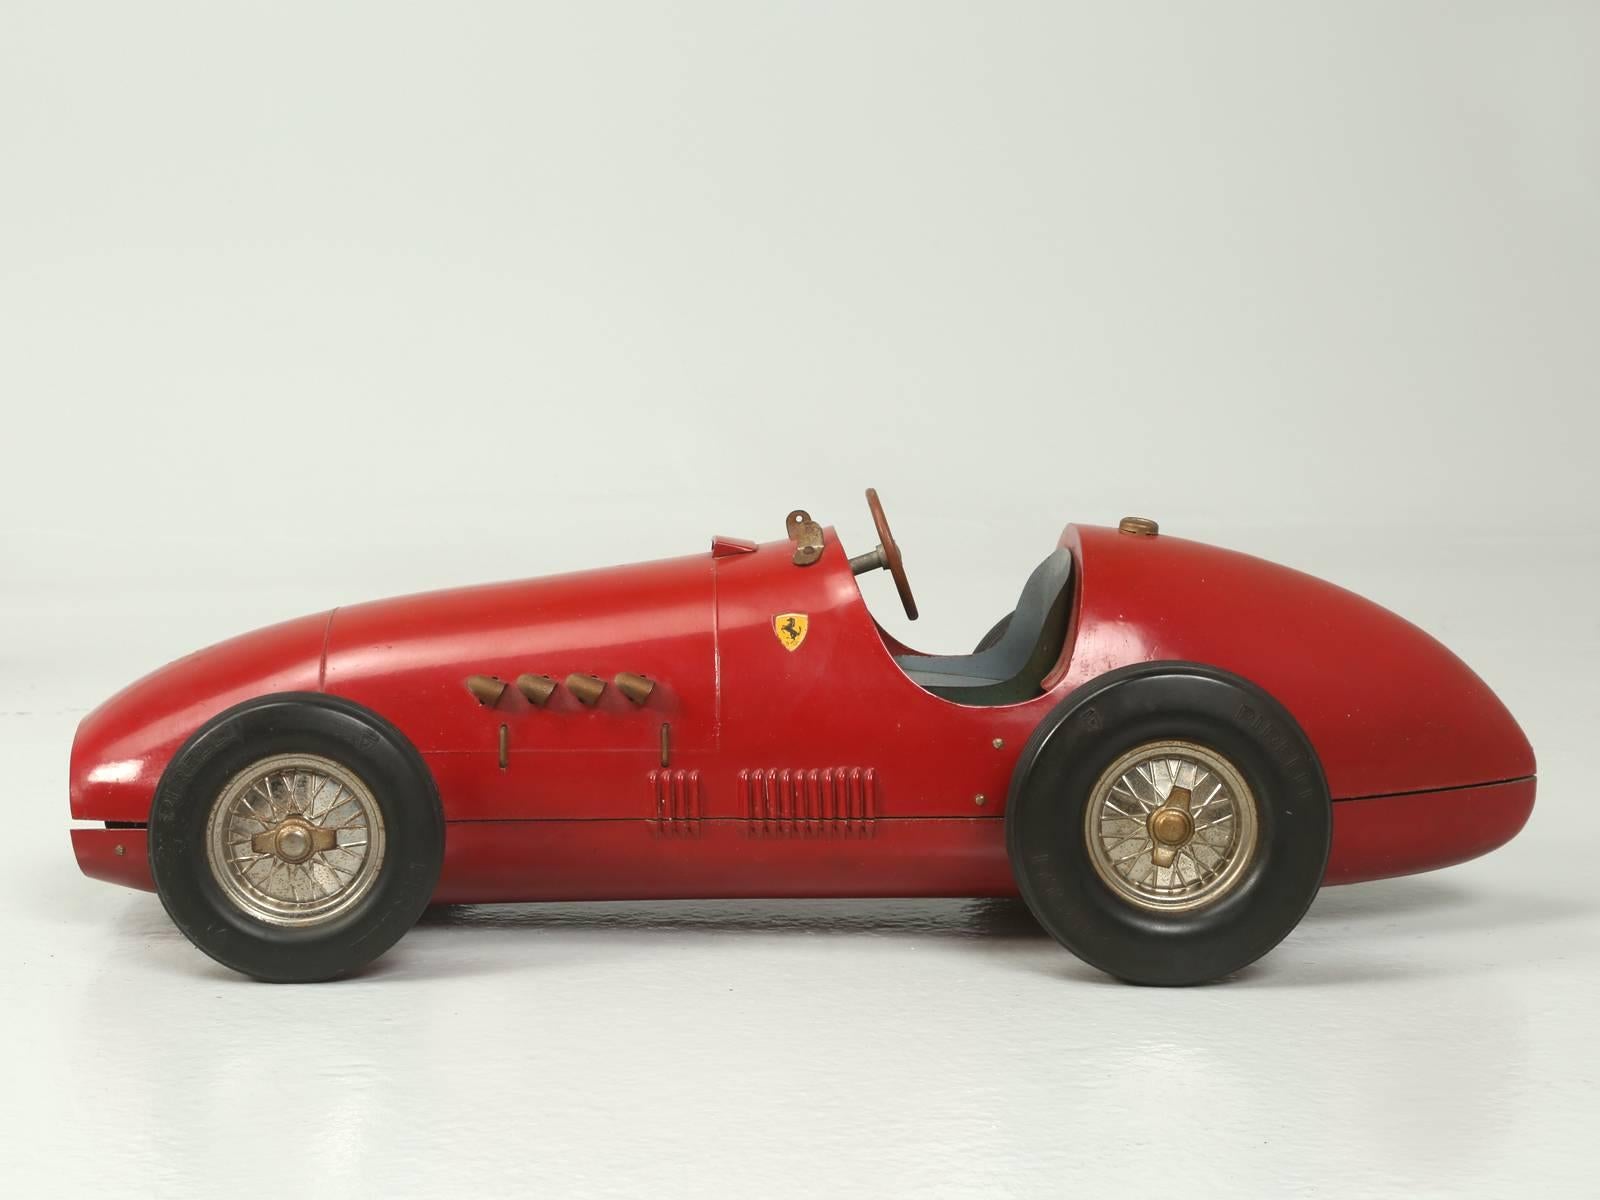 Rare and very desirable, steel-bodied, 1:16 scale Ferrari 500 F2, was produced in limited quantities by Marchesini, for the Italian distillery Toschi. The Ferrari originally held a bottle of Toschi cherries in liqueur and were presented to the race